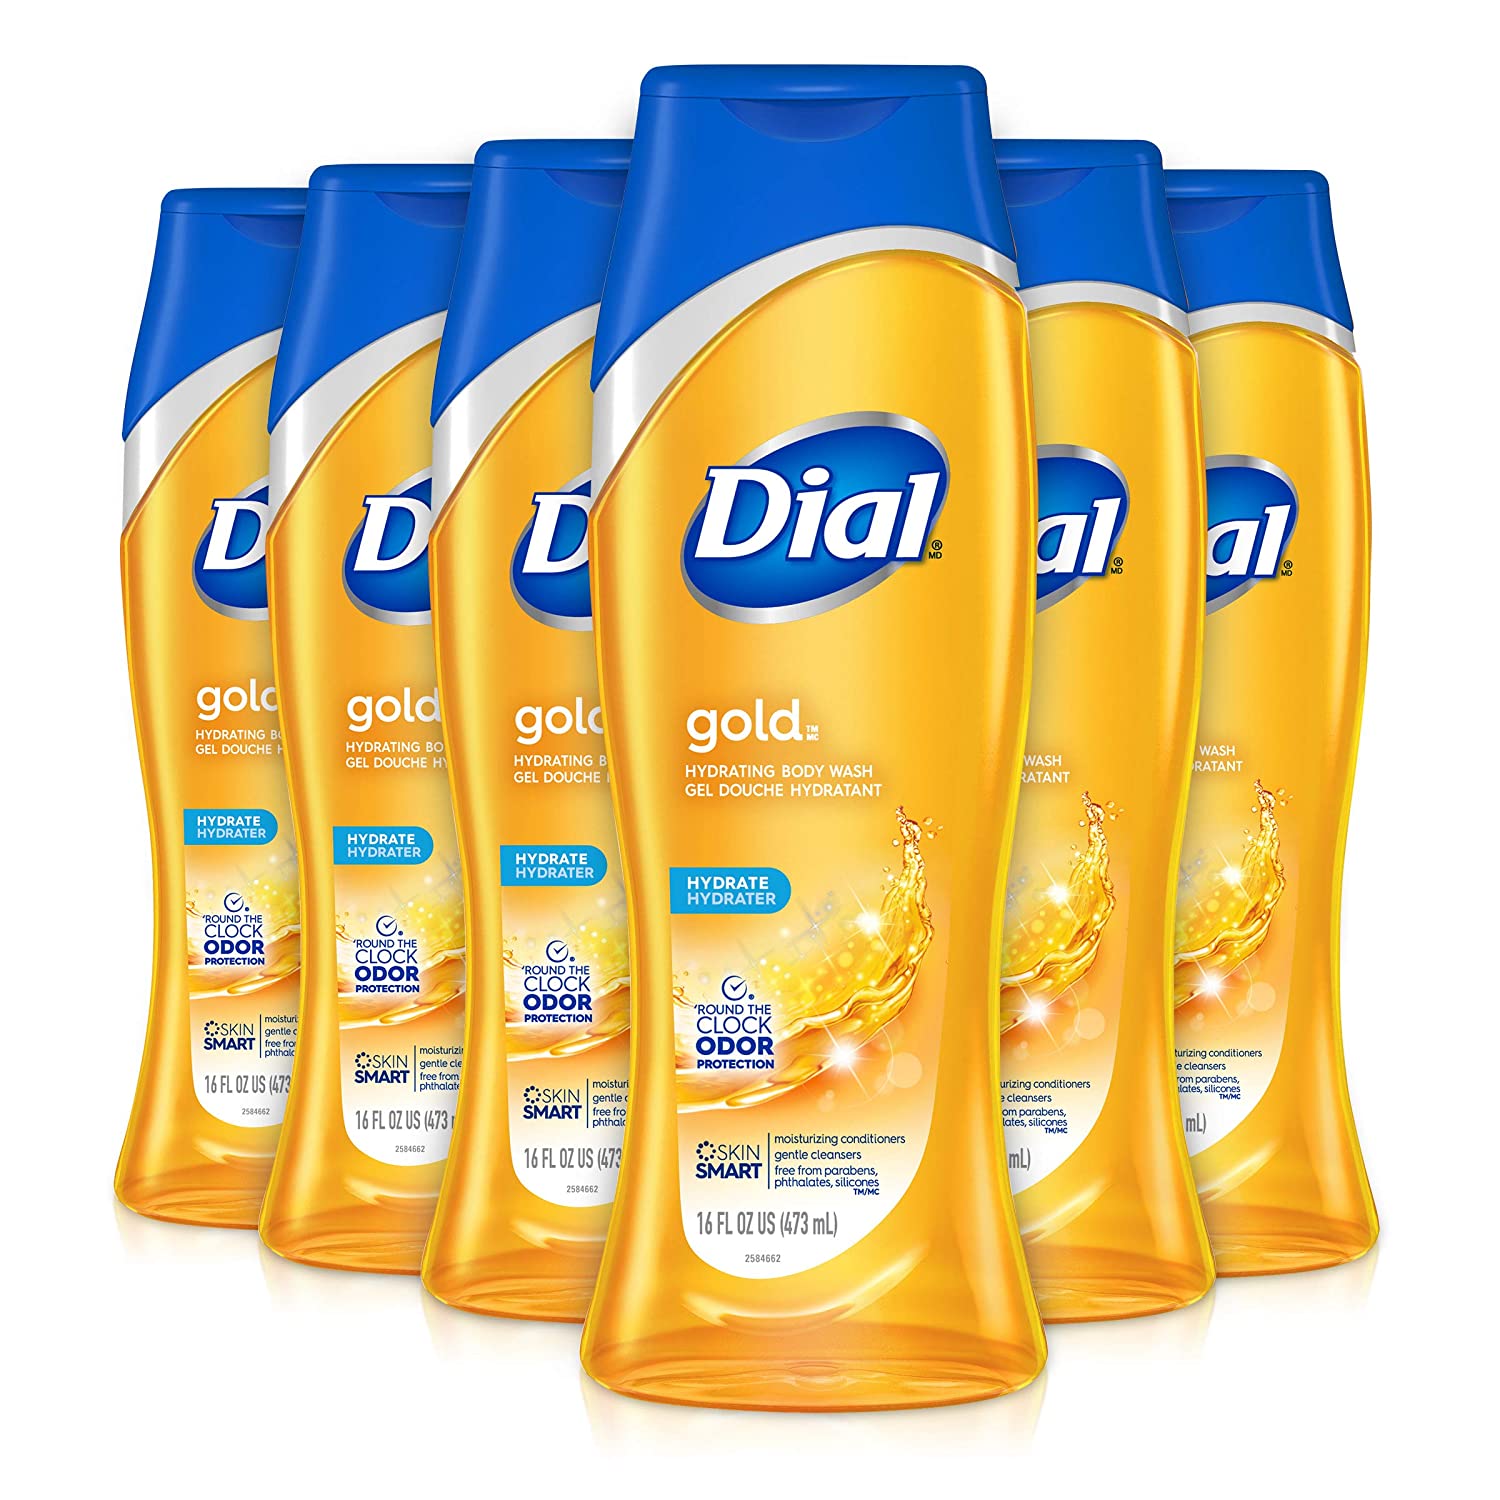 12 count 16oz Dial Body Wash, Gold: $21.55 or lower